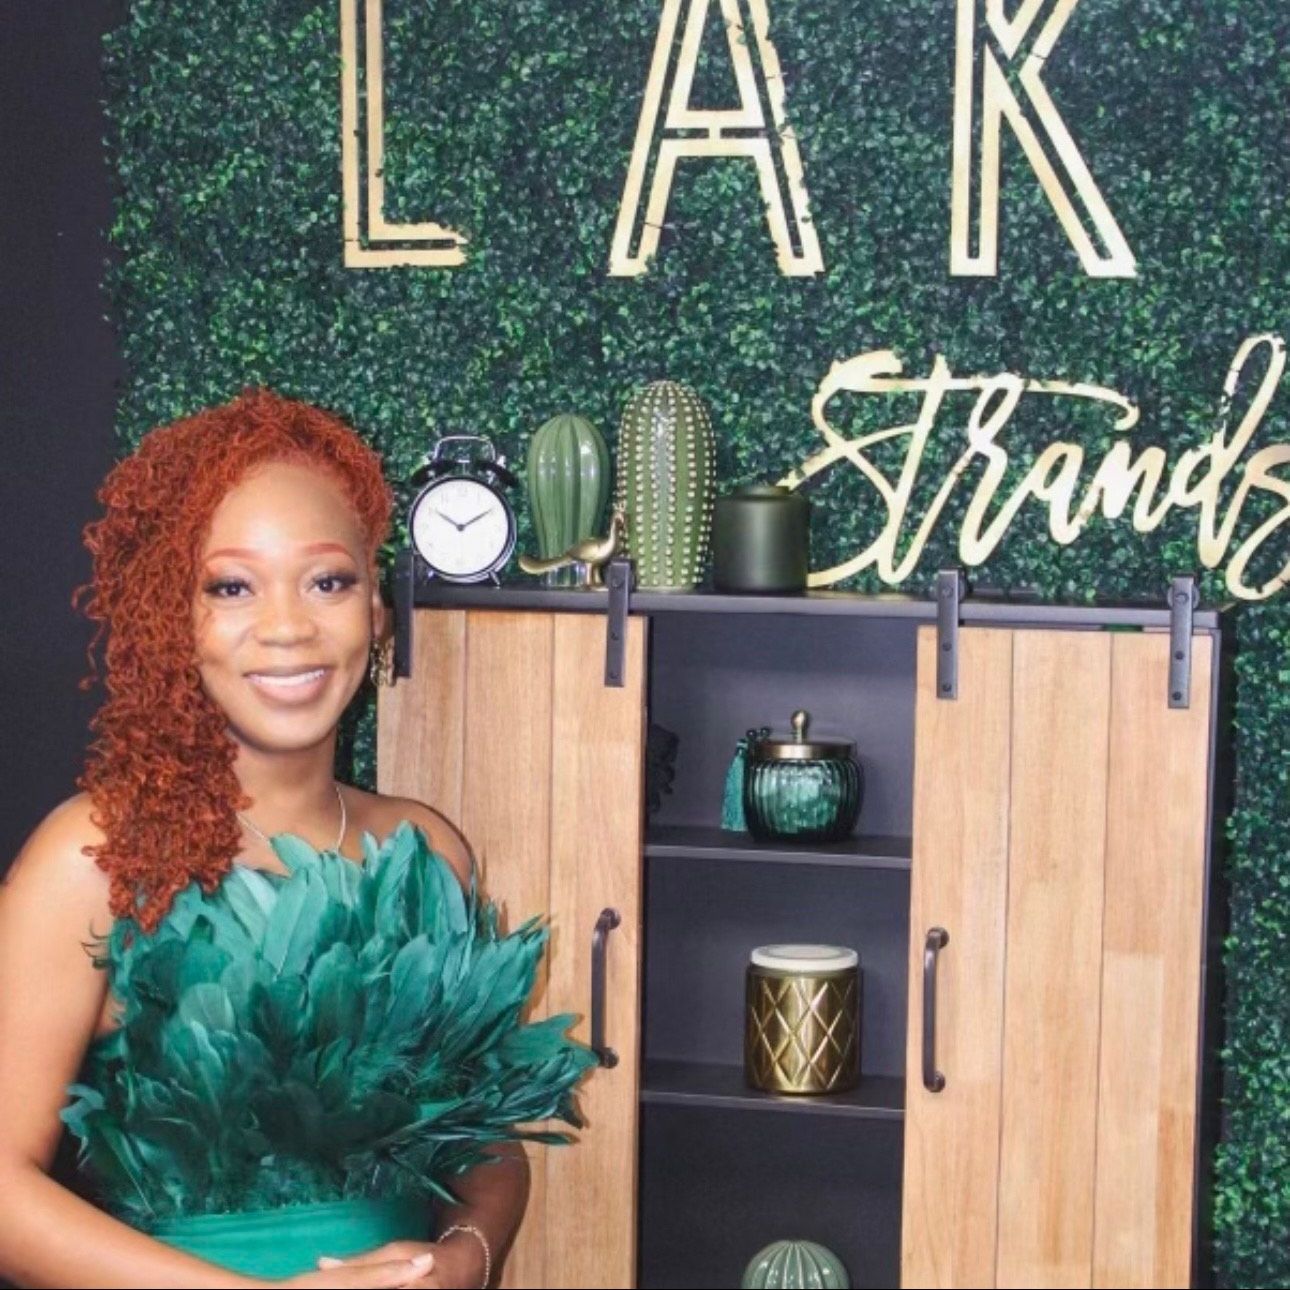 A woman in a green dress is standing in front of a sign that says lak trends